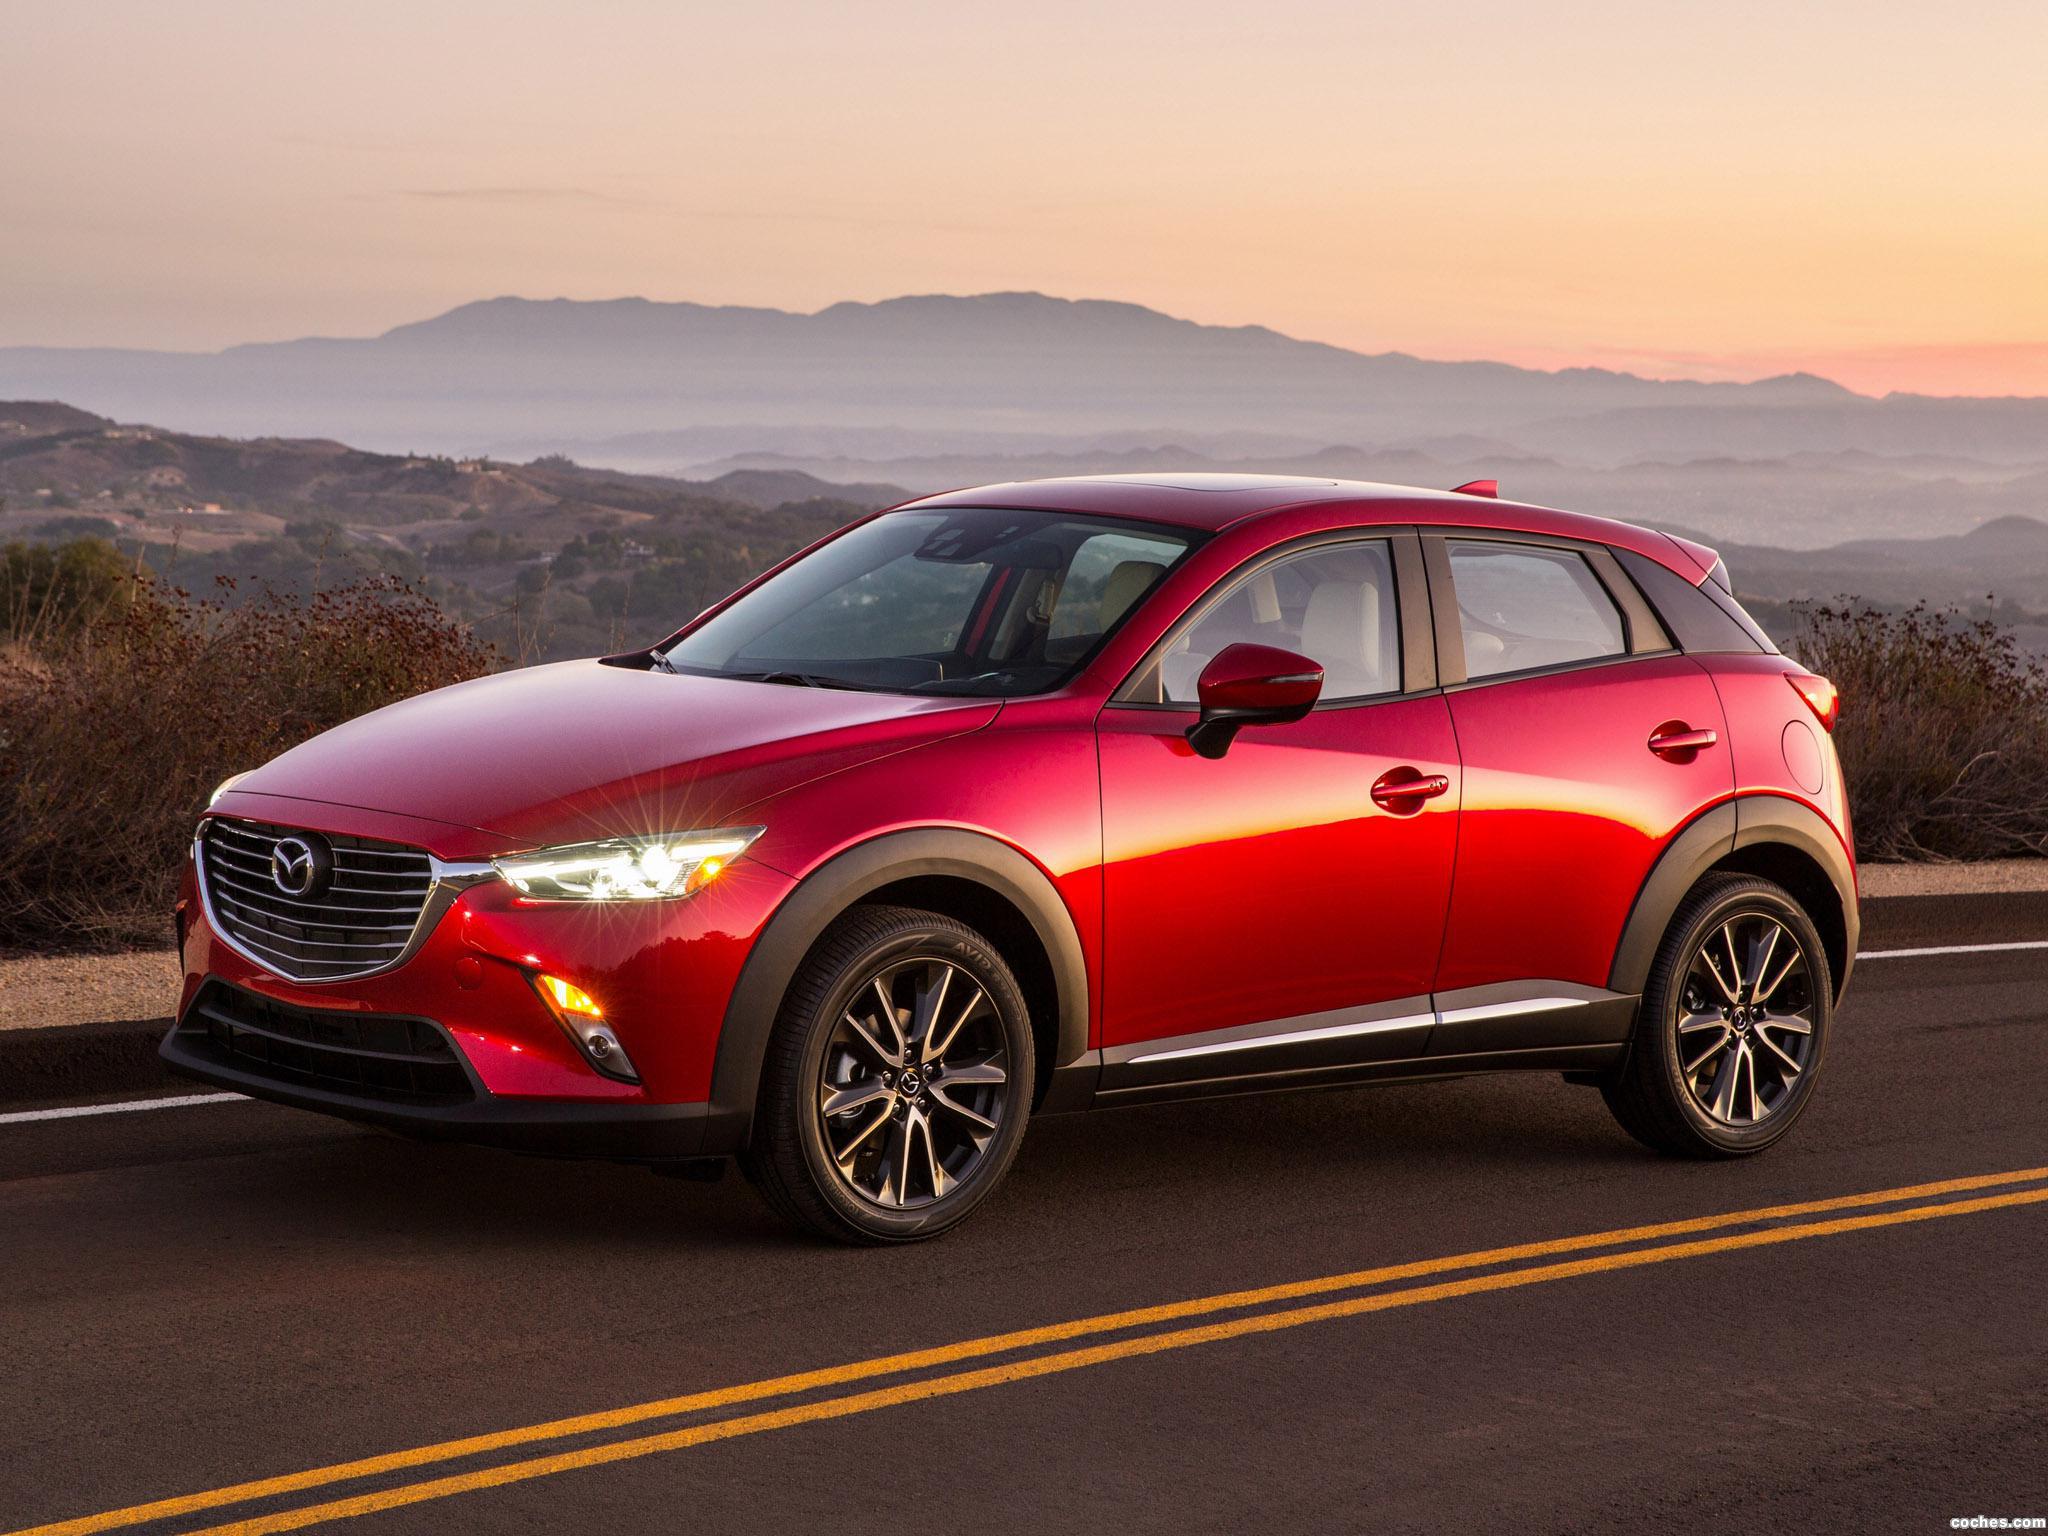 Is Mazda Cx 9 Reliable